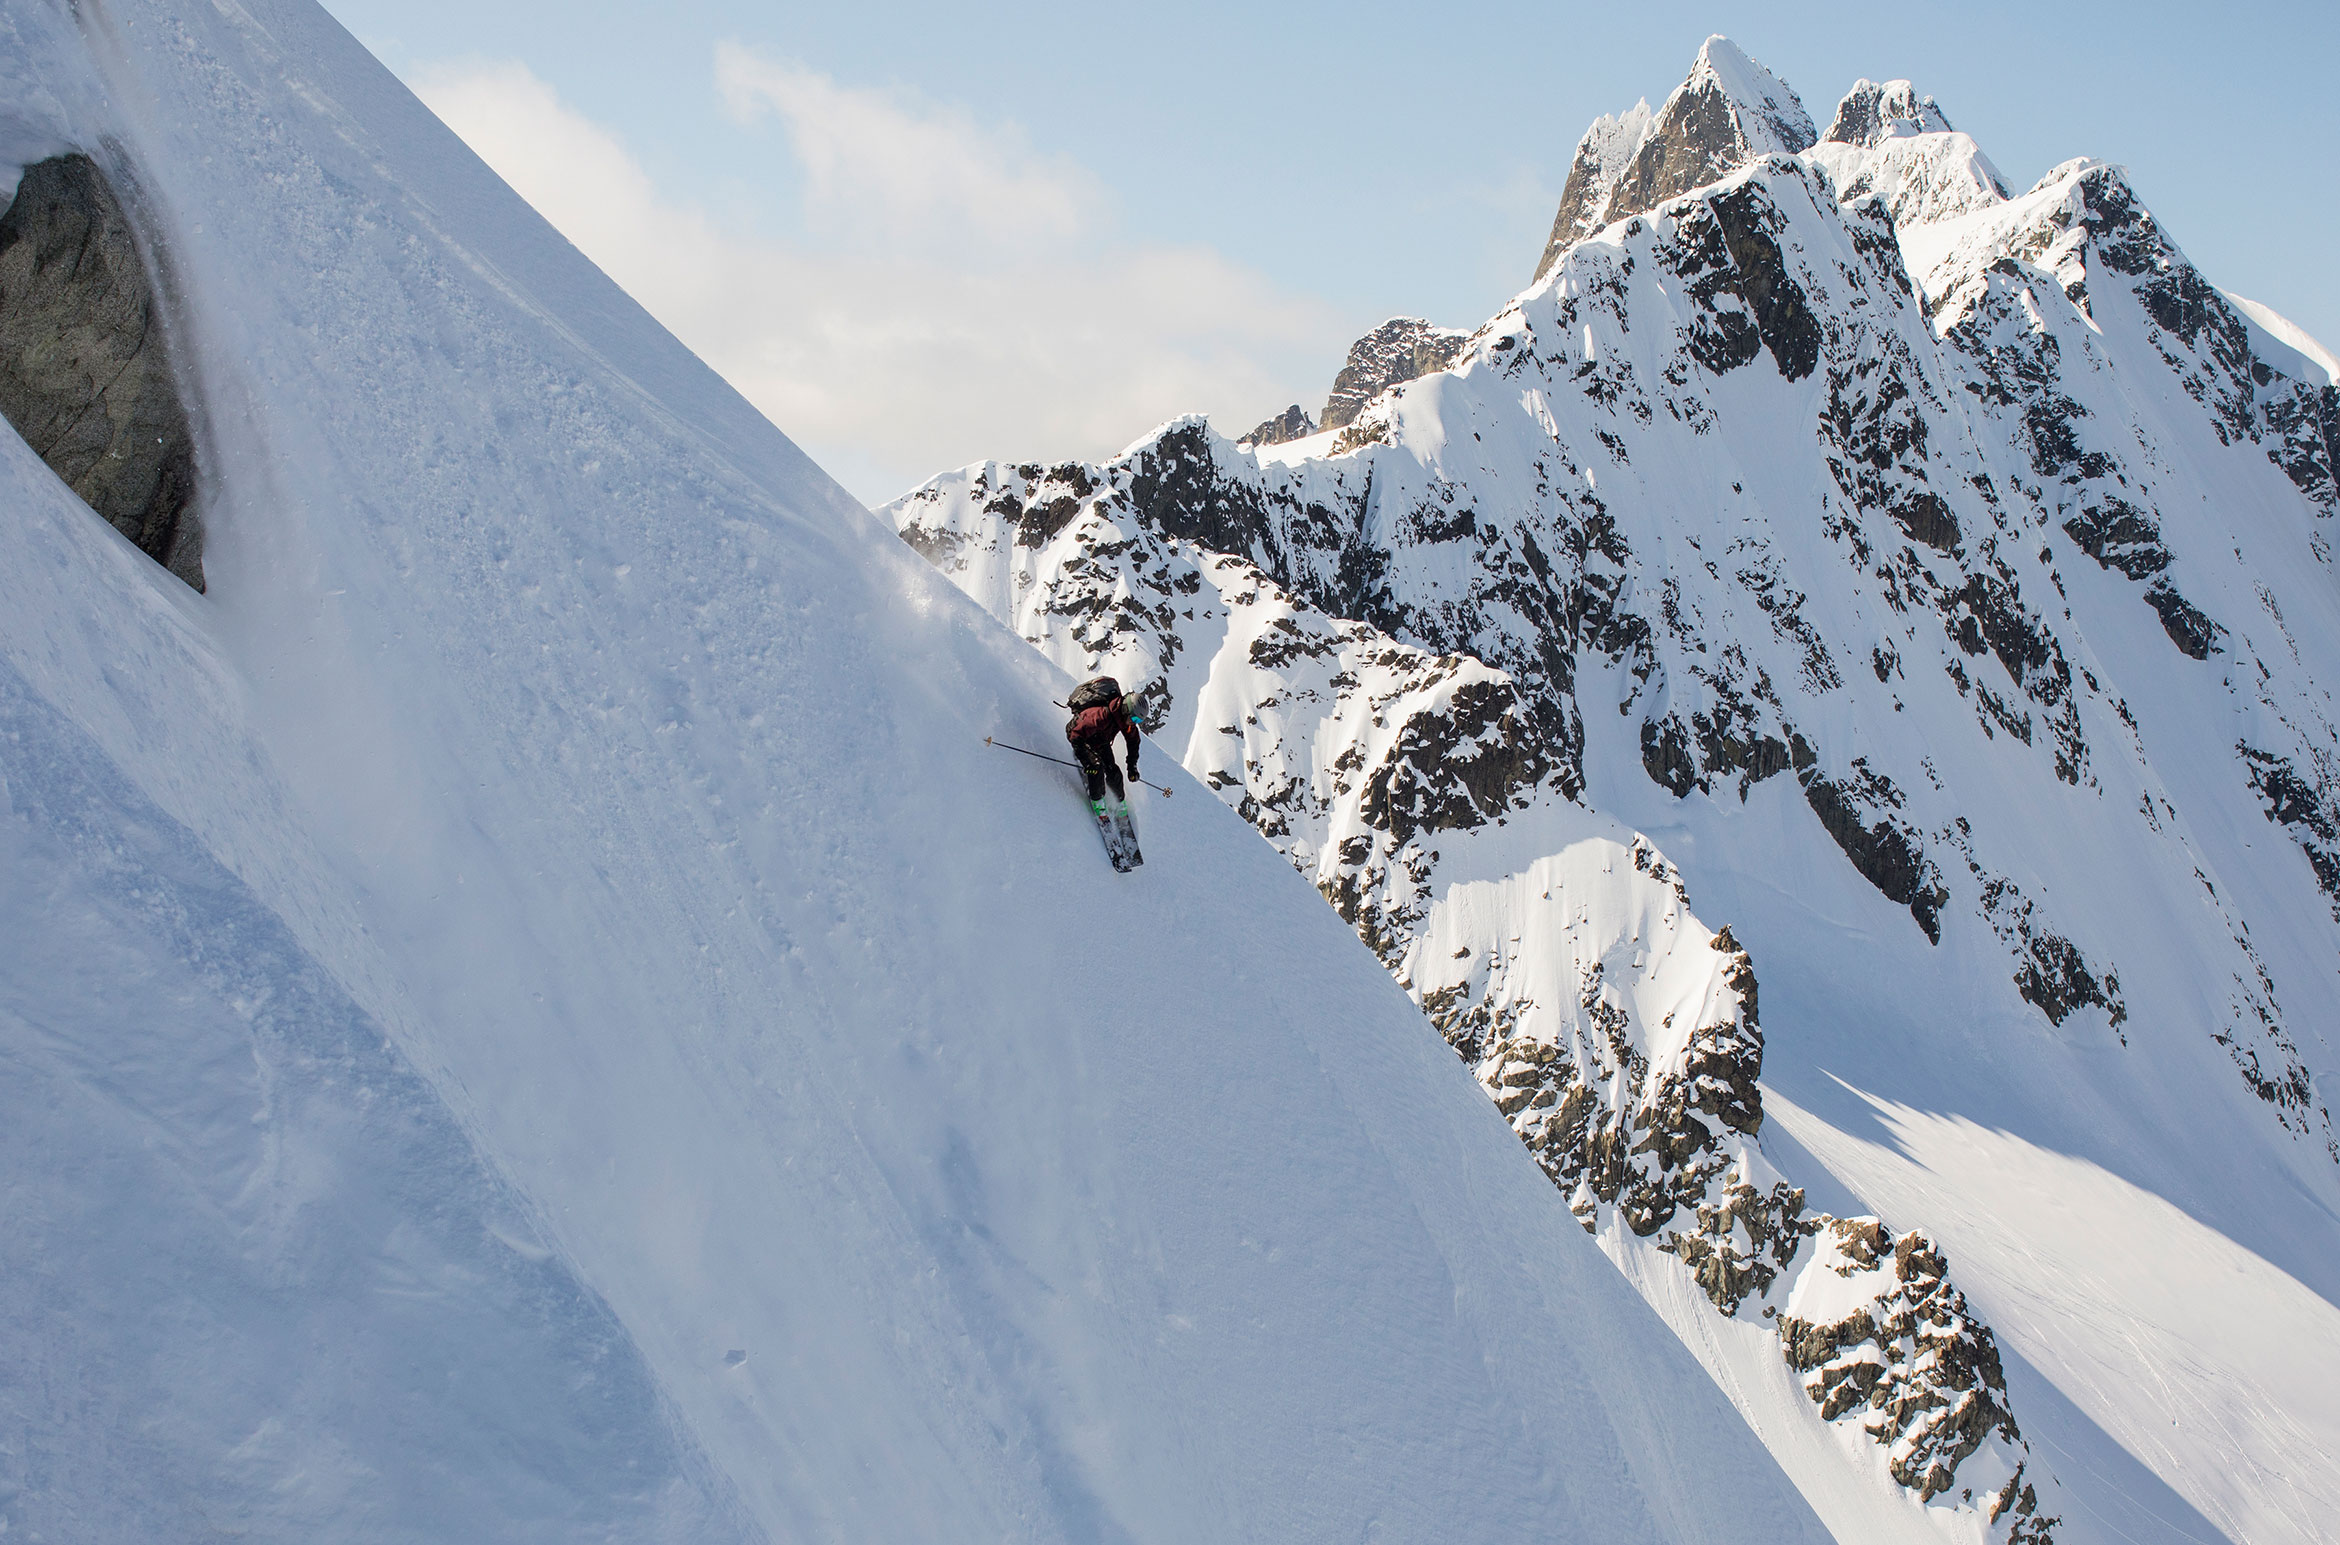 A skier skis a steep line in the Whistler backcountry.